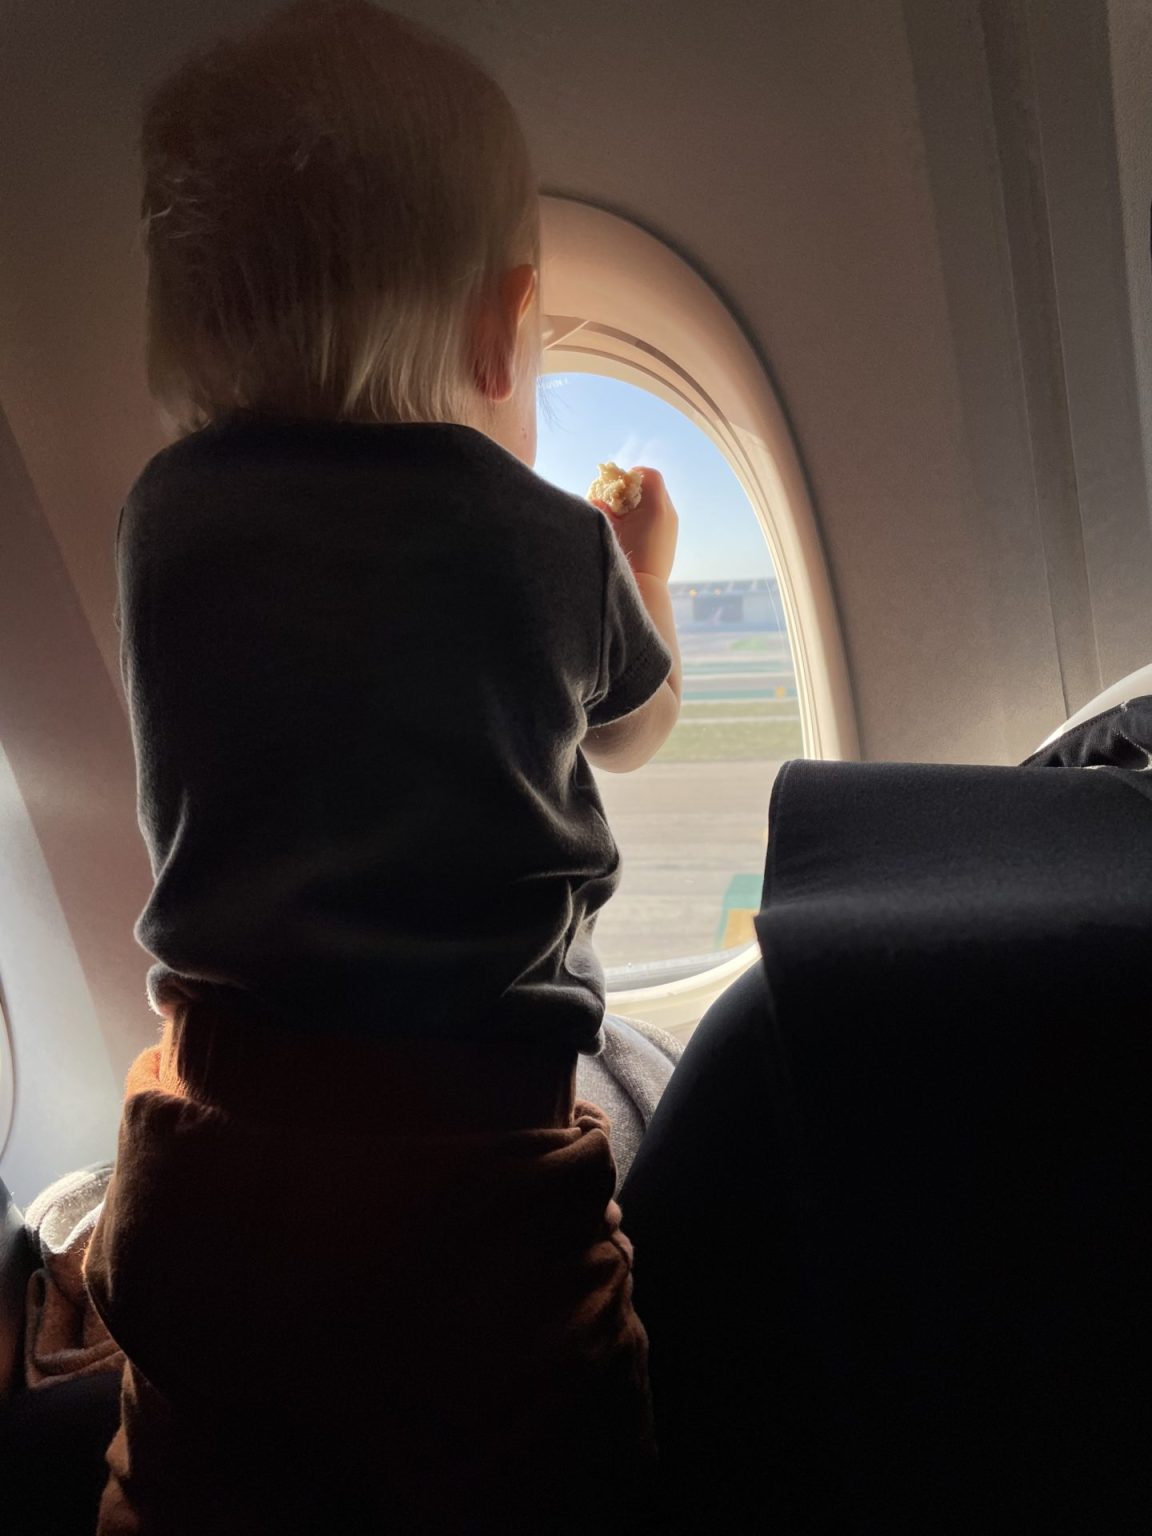 10 Essential Tips for Flying with a Toddler